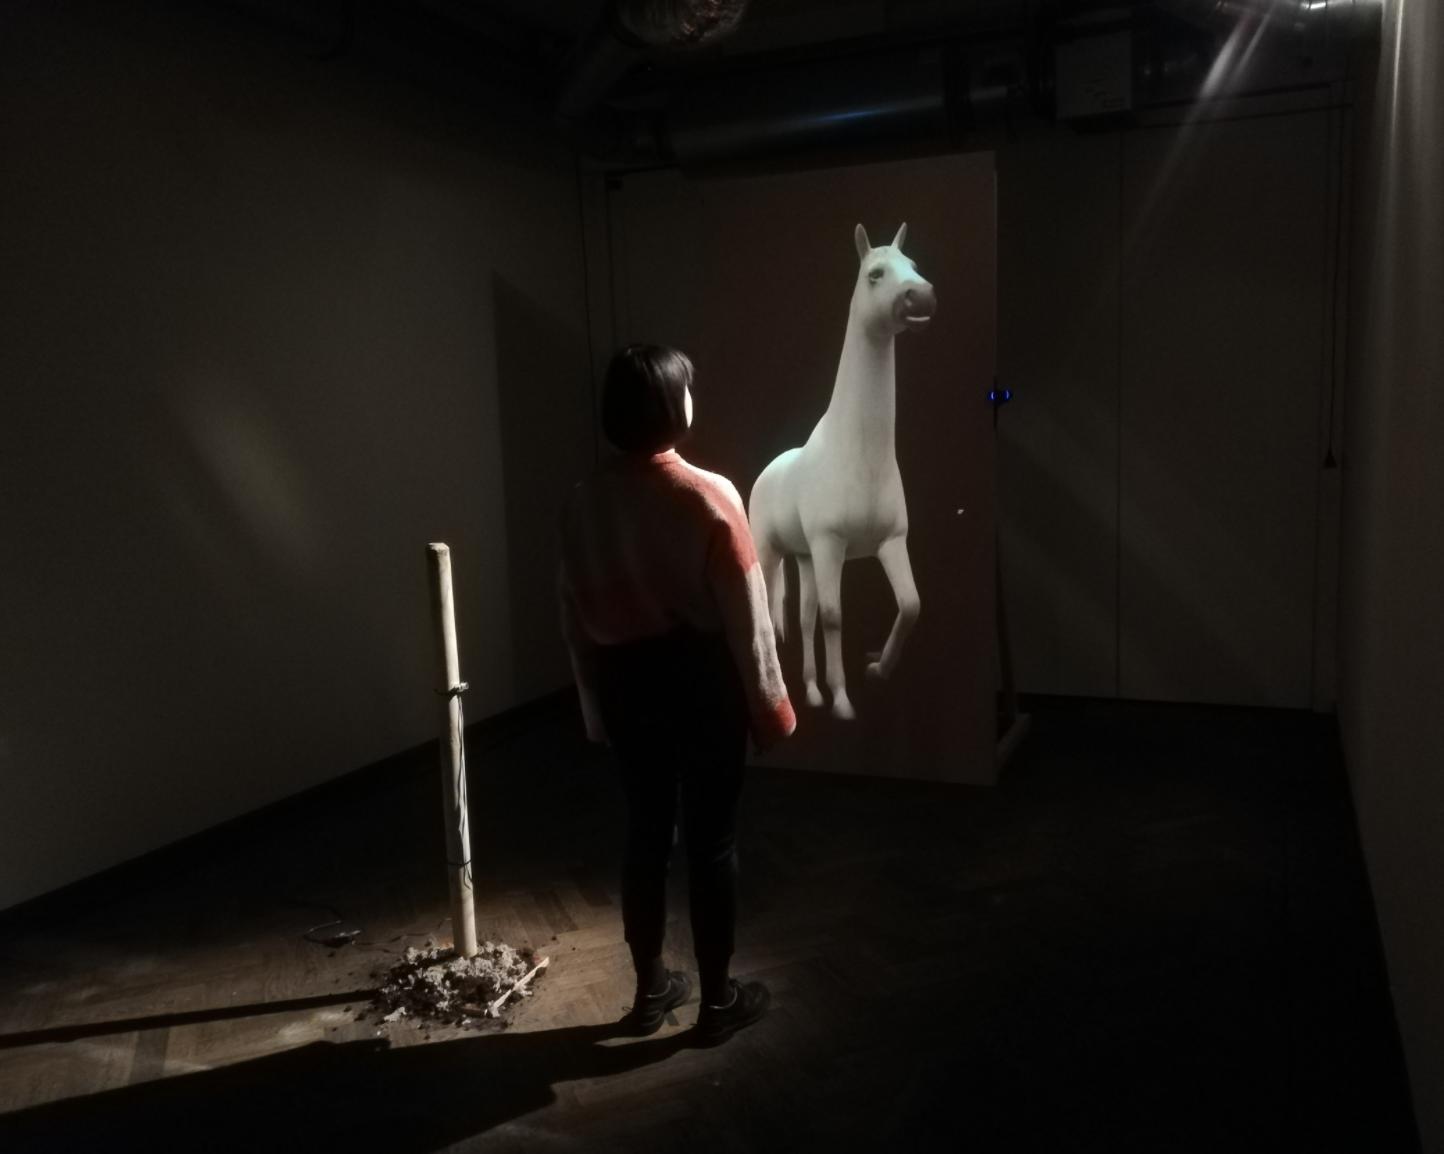 A photograph from Team Three of a person stading in front of a projected image of a white horse